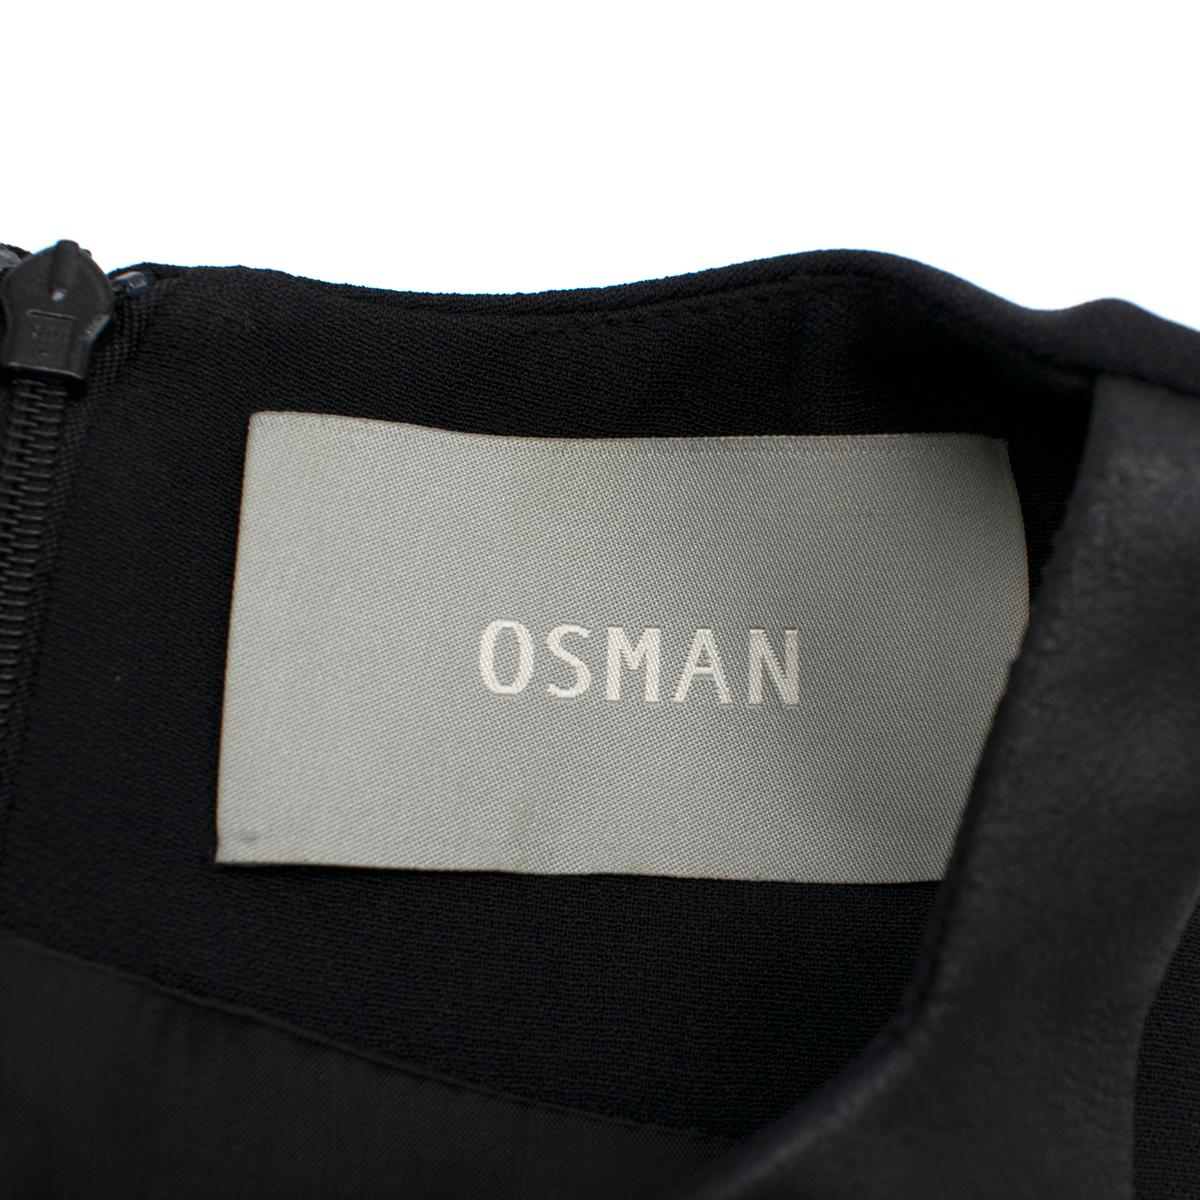 Osman Black Long Dress with Leather Collar estimated SIZE XS-S 2